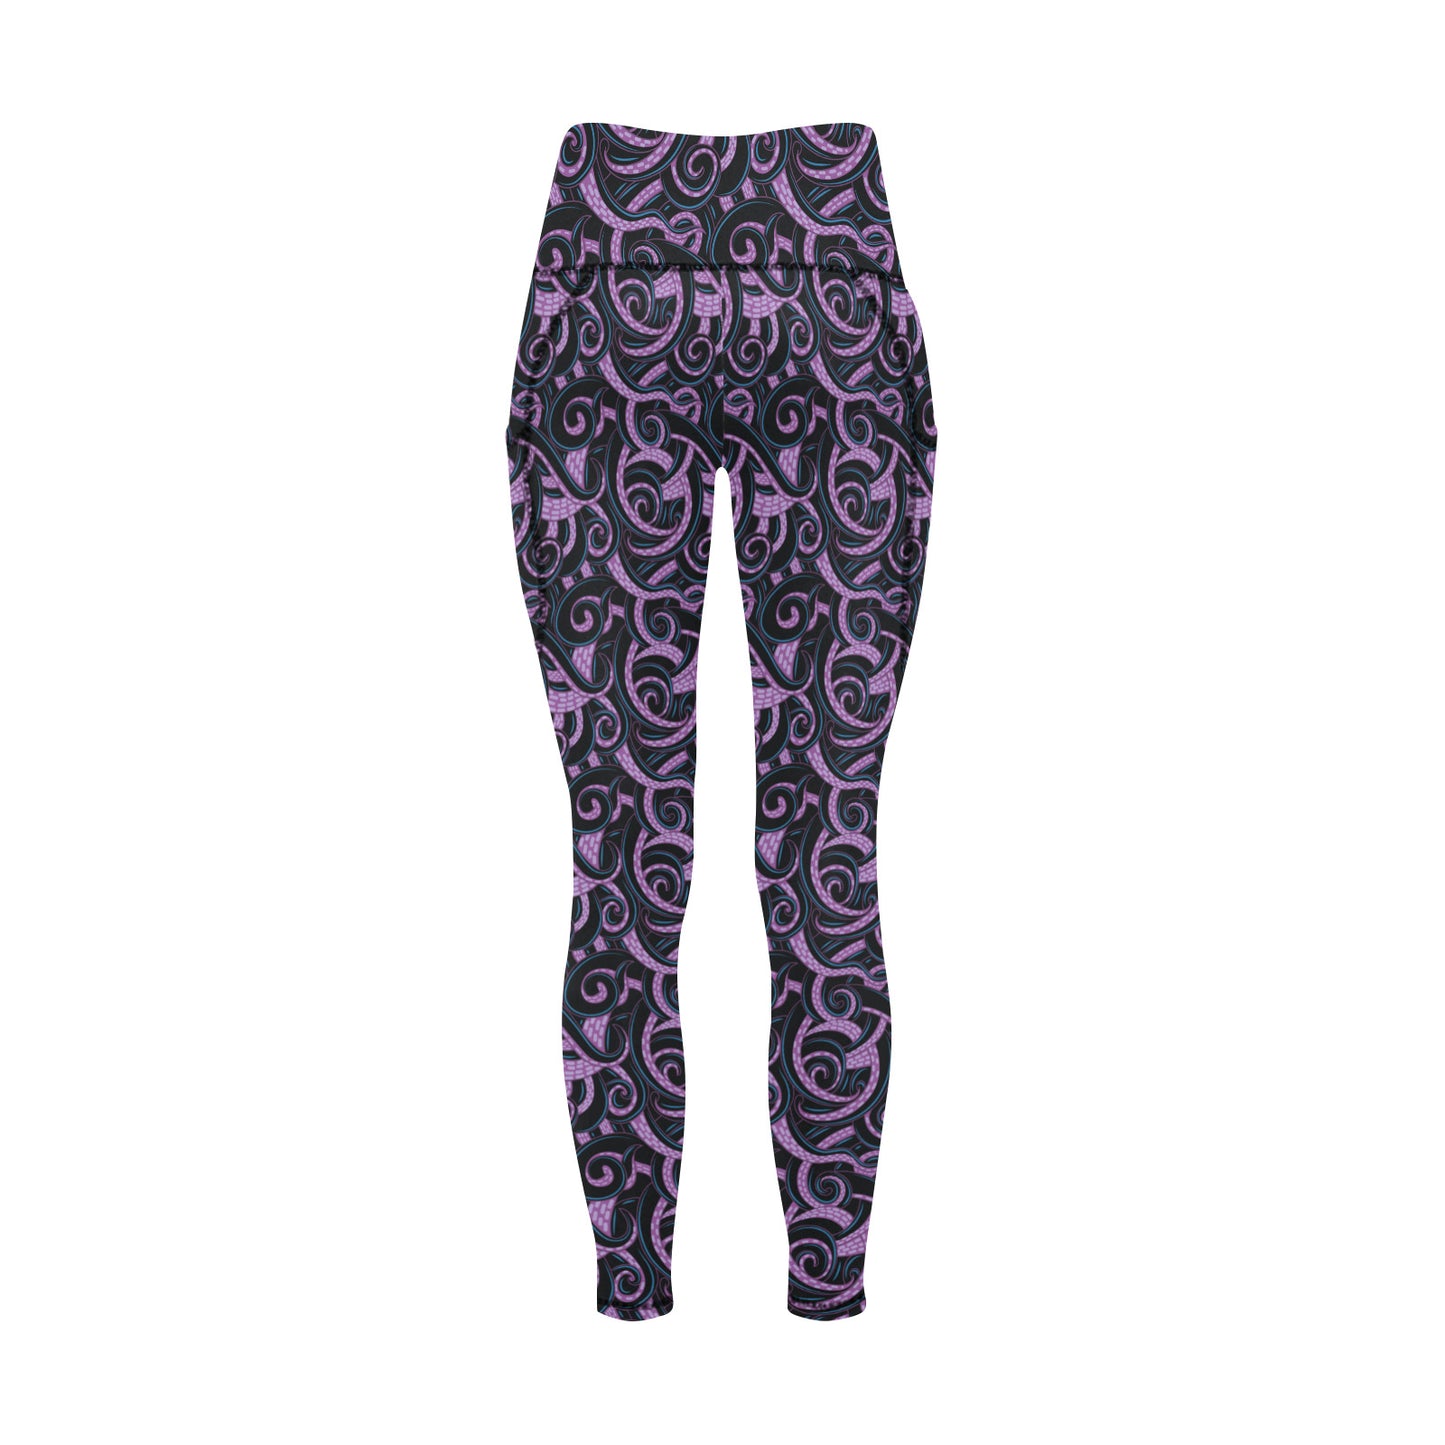 Ursula Tentacles Women's Athletic Leggings With Pockets